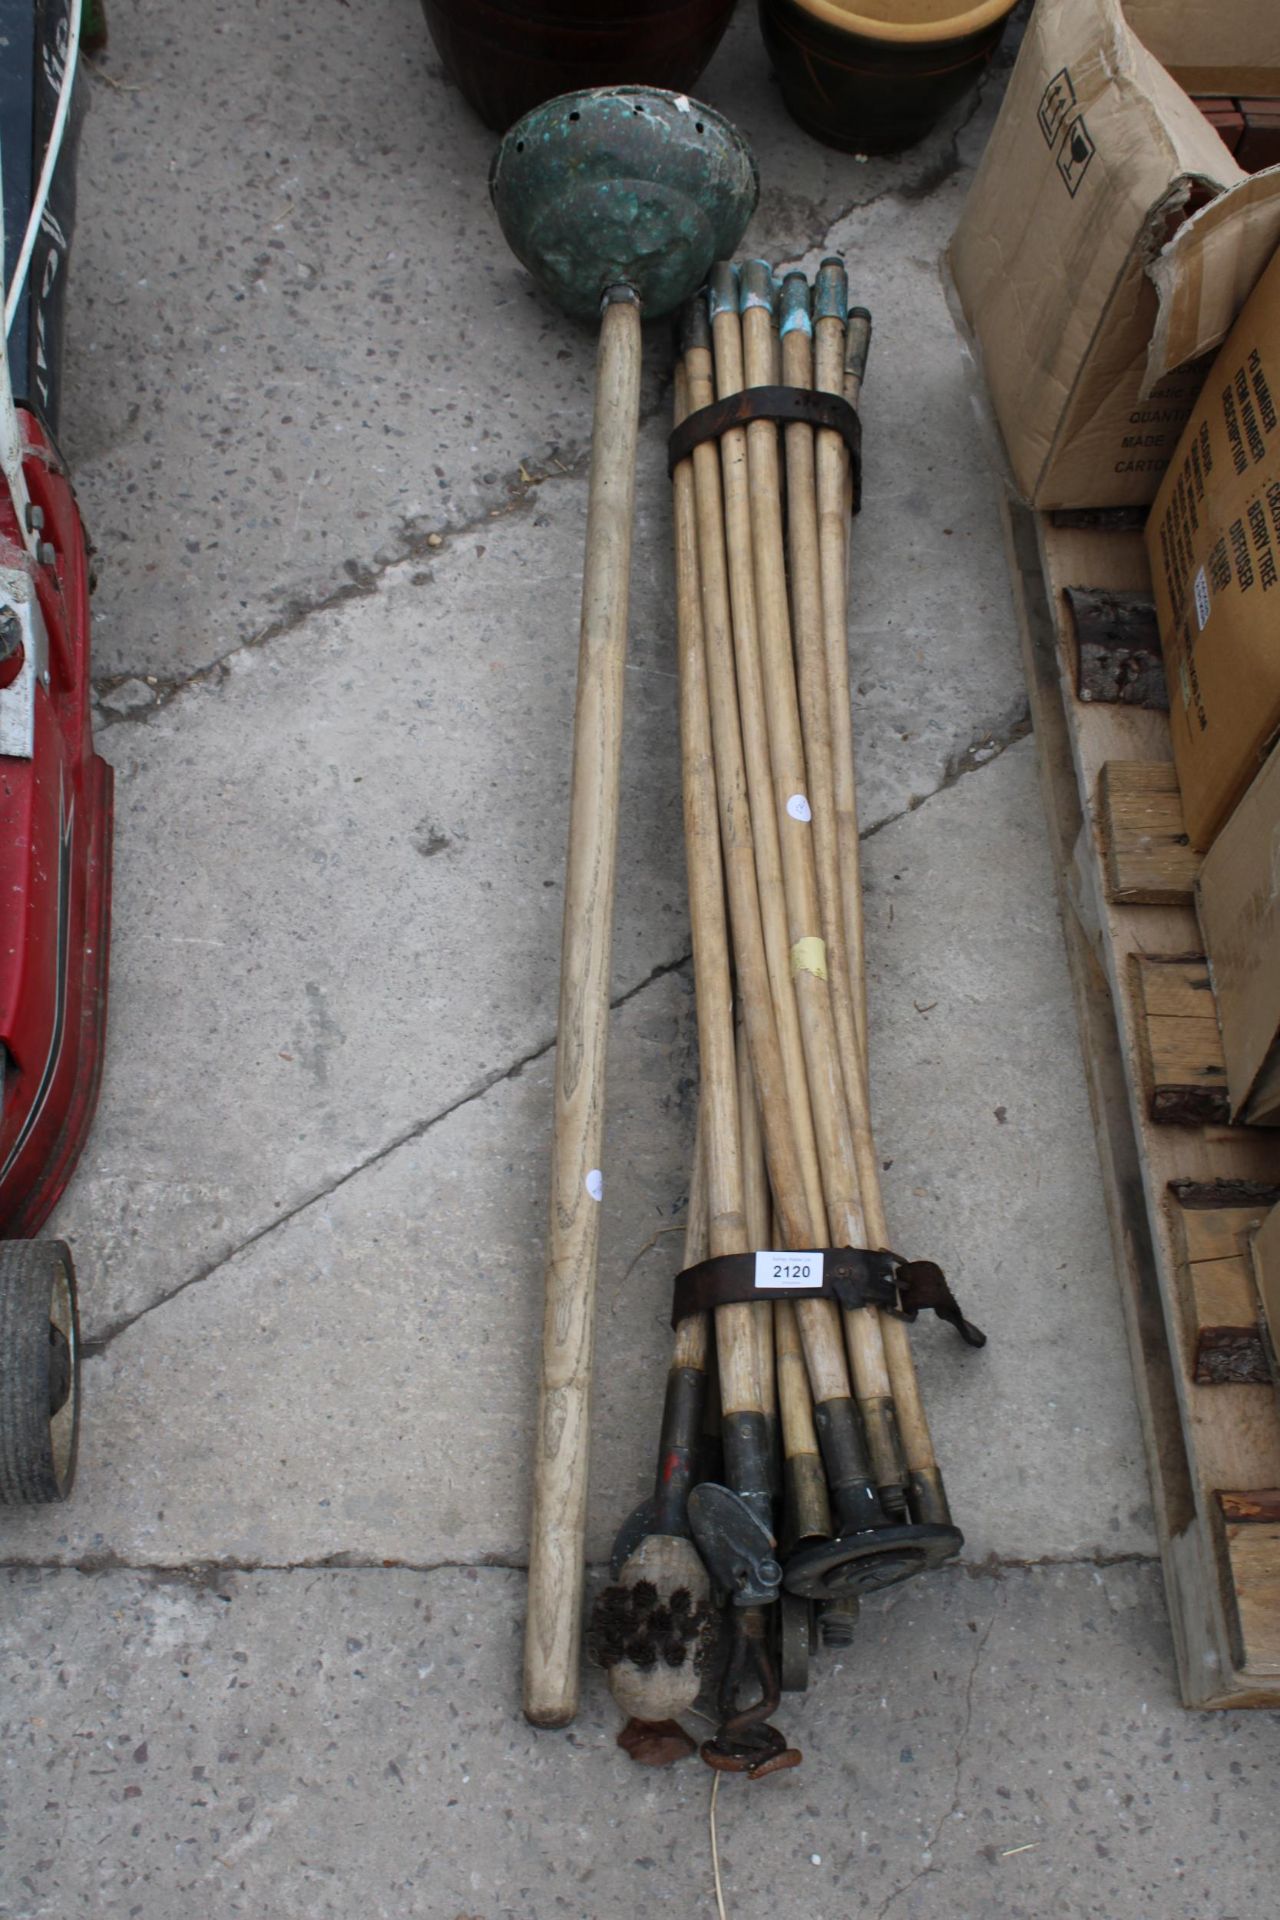 A SET OF DRAINING RODS AND A DOLLY POSSER